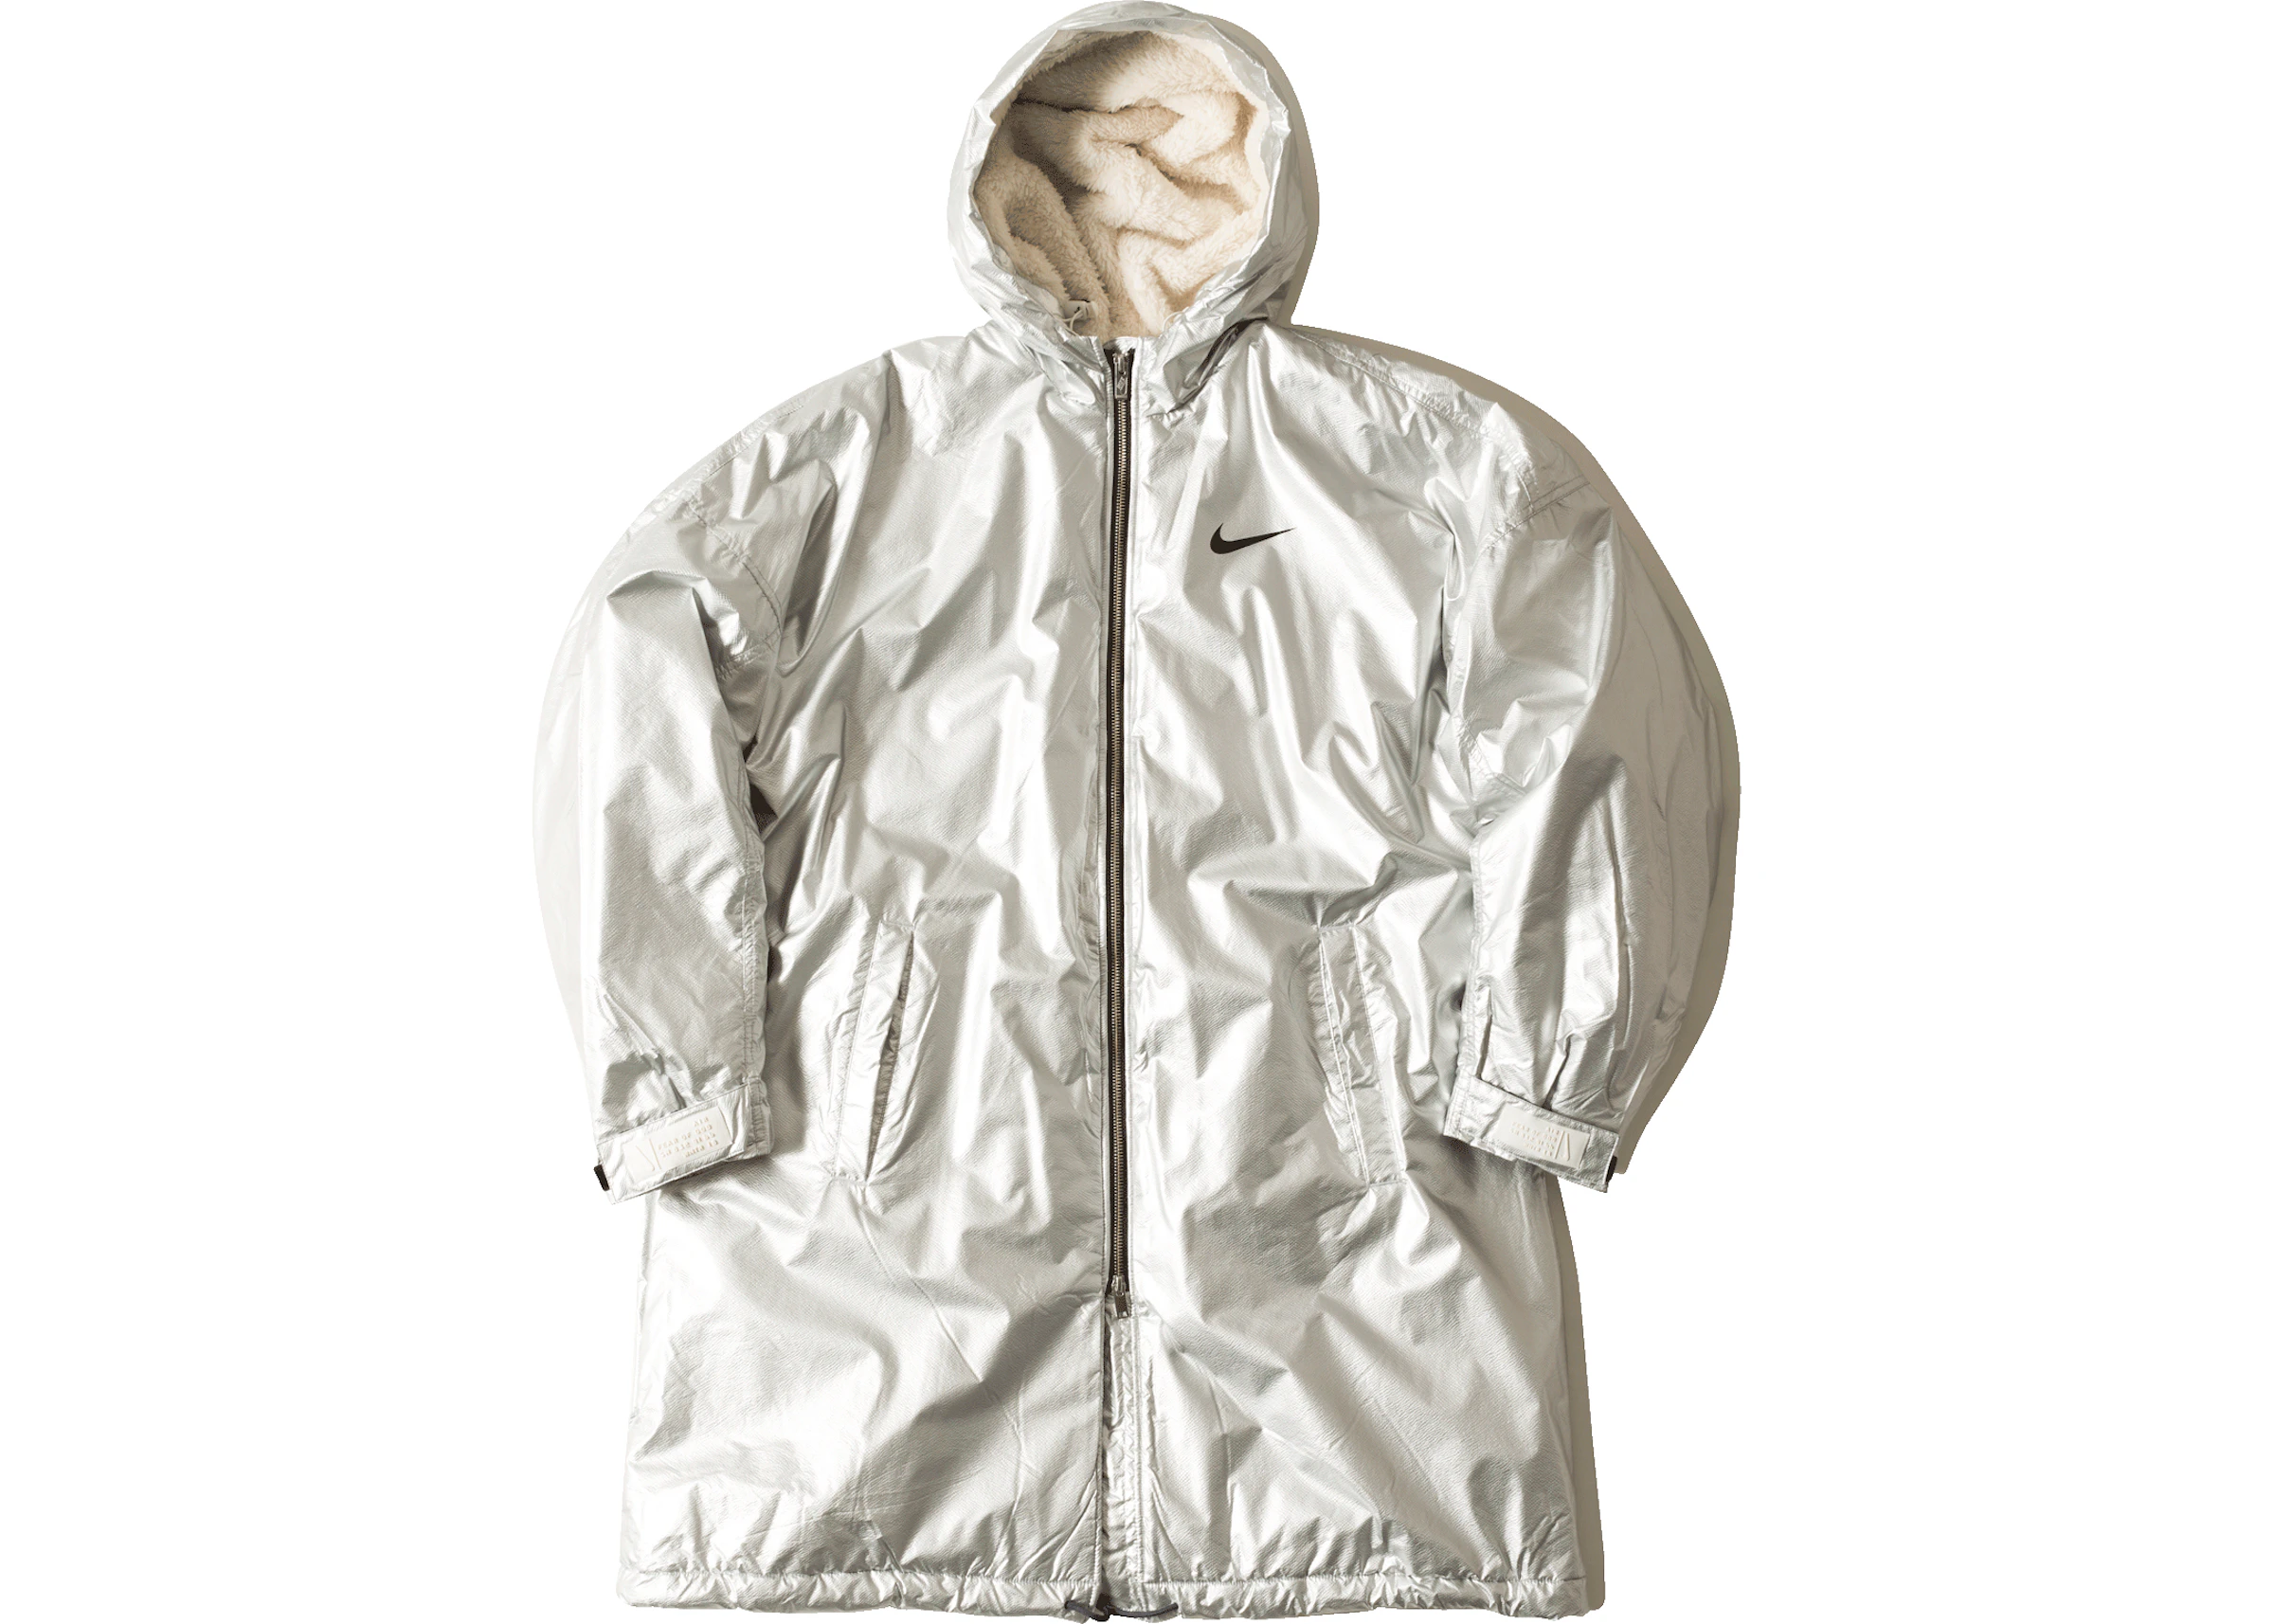 style Drive away Transparent FEAR OF GOD x Nike Parka Jacket Metalic Silver - FW18 - US